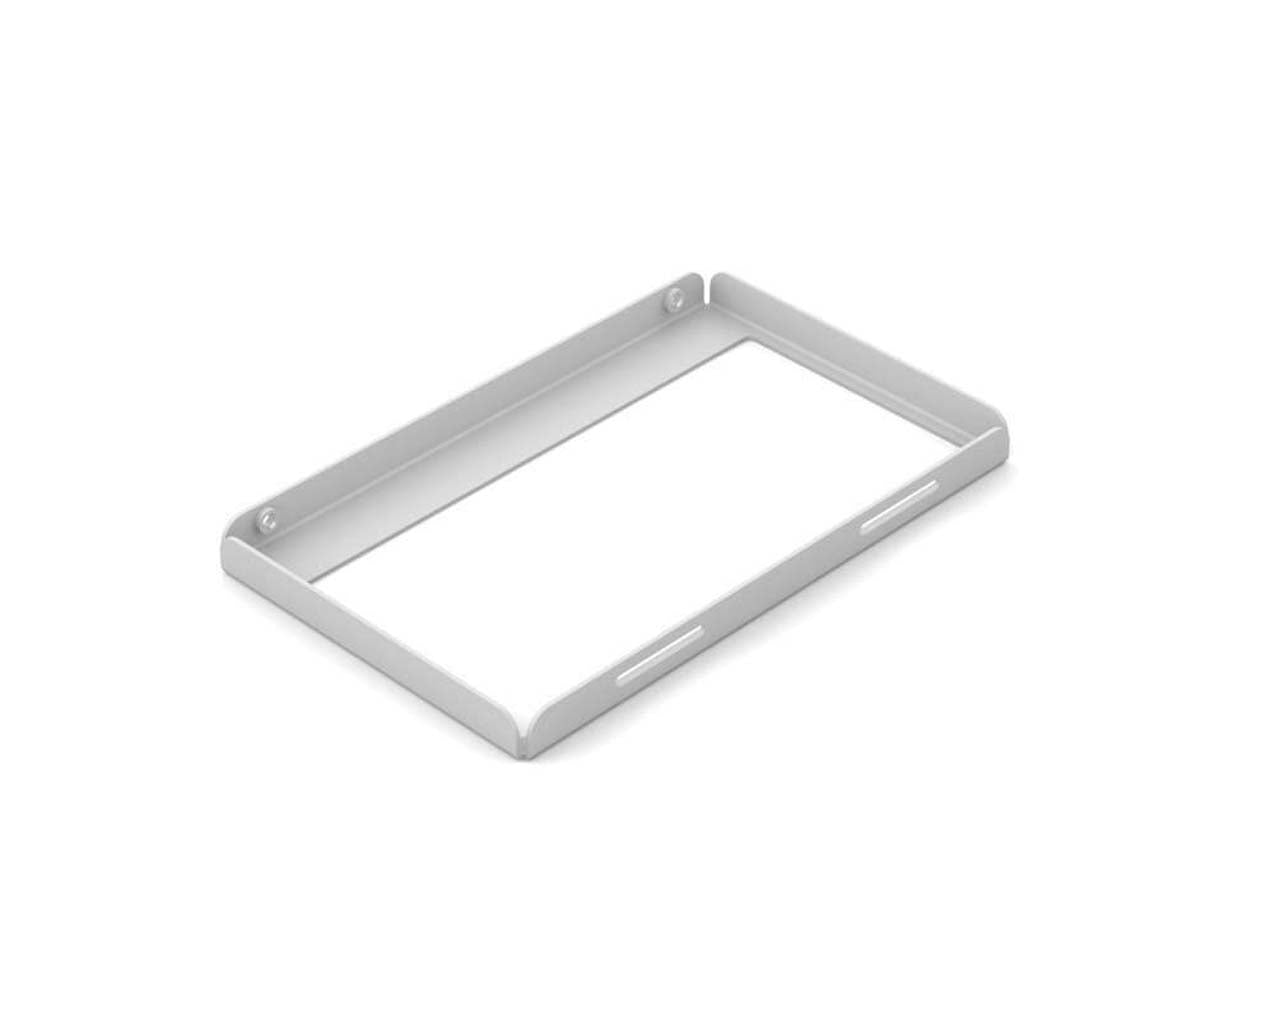 Praxis WetBenchSX PSU Front Bracket - PrimoChill - KEEPING IT COOL White